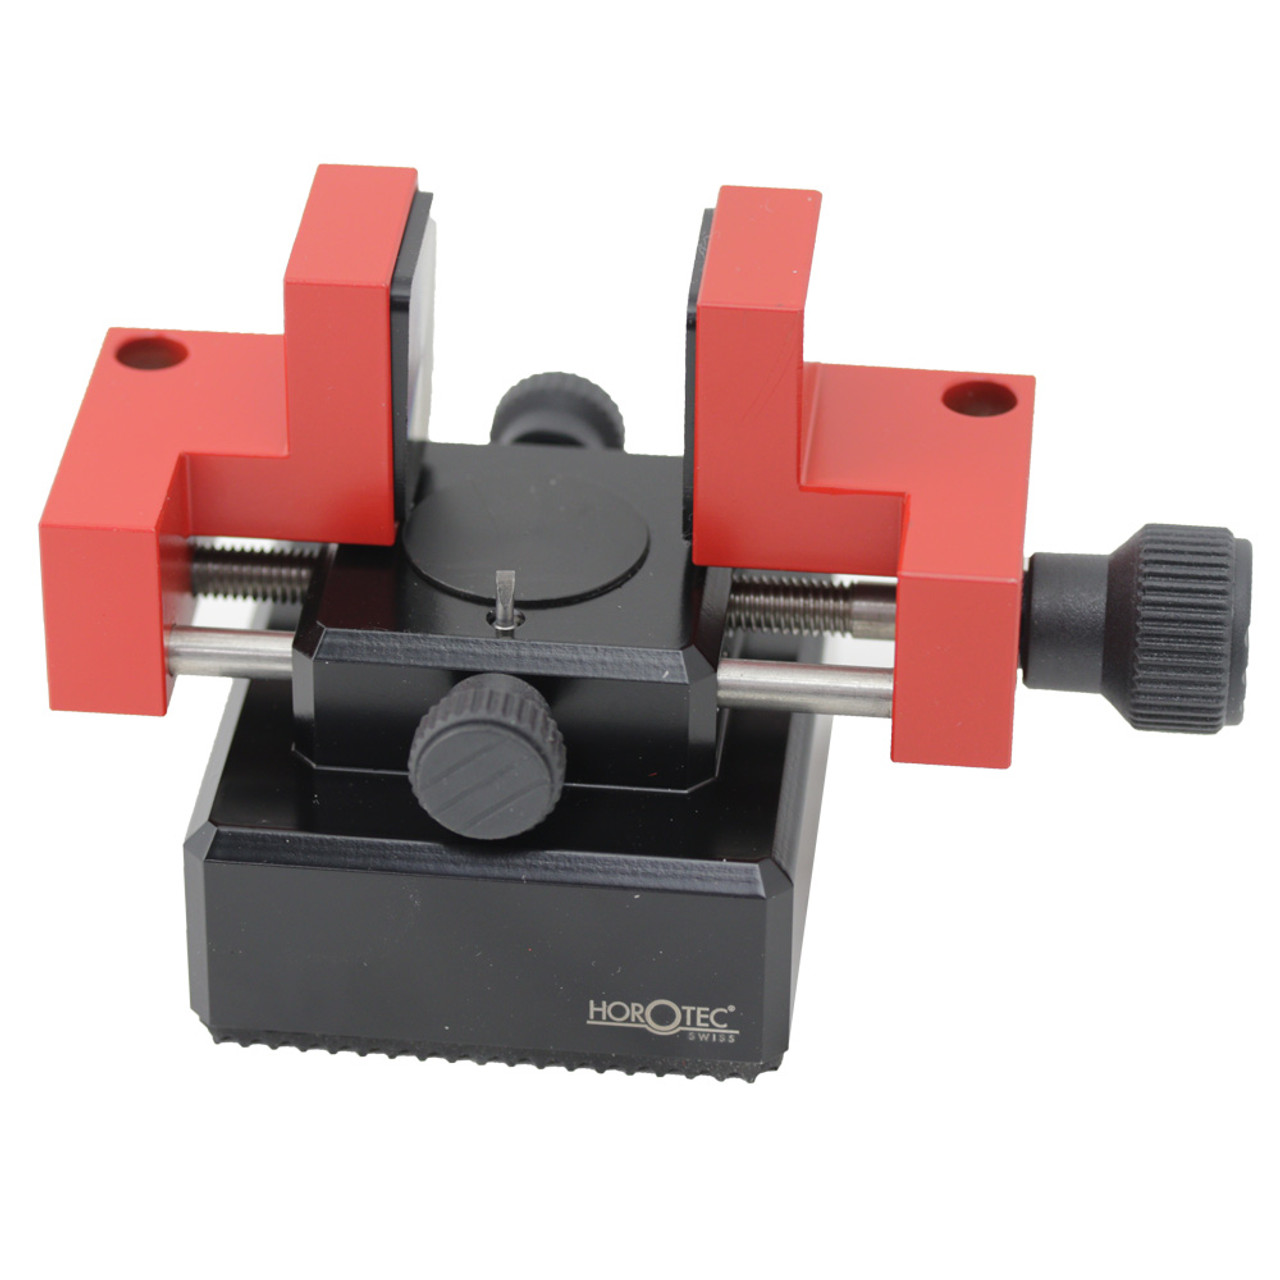 Double Third Hand with Magnifier Hands Free Work Holder Vise Clamp